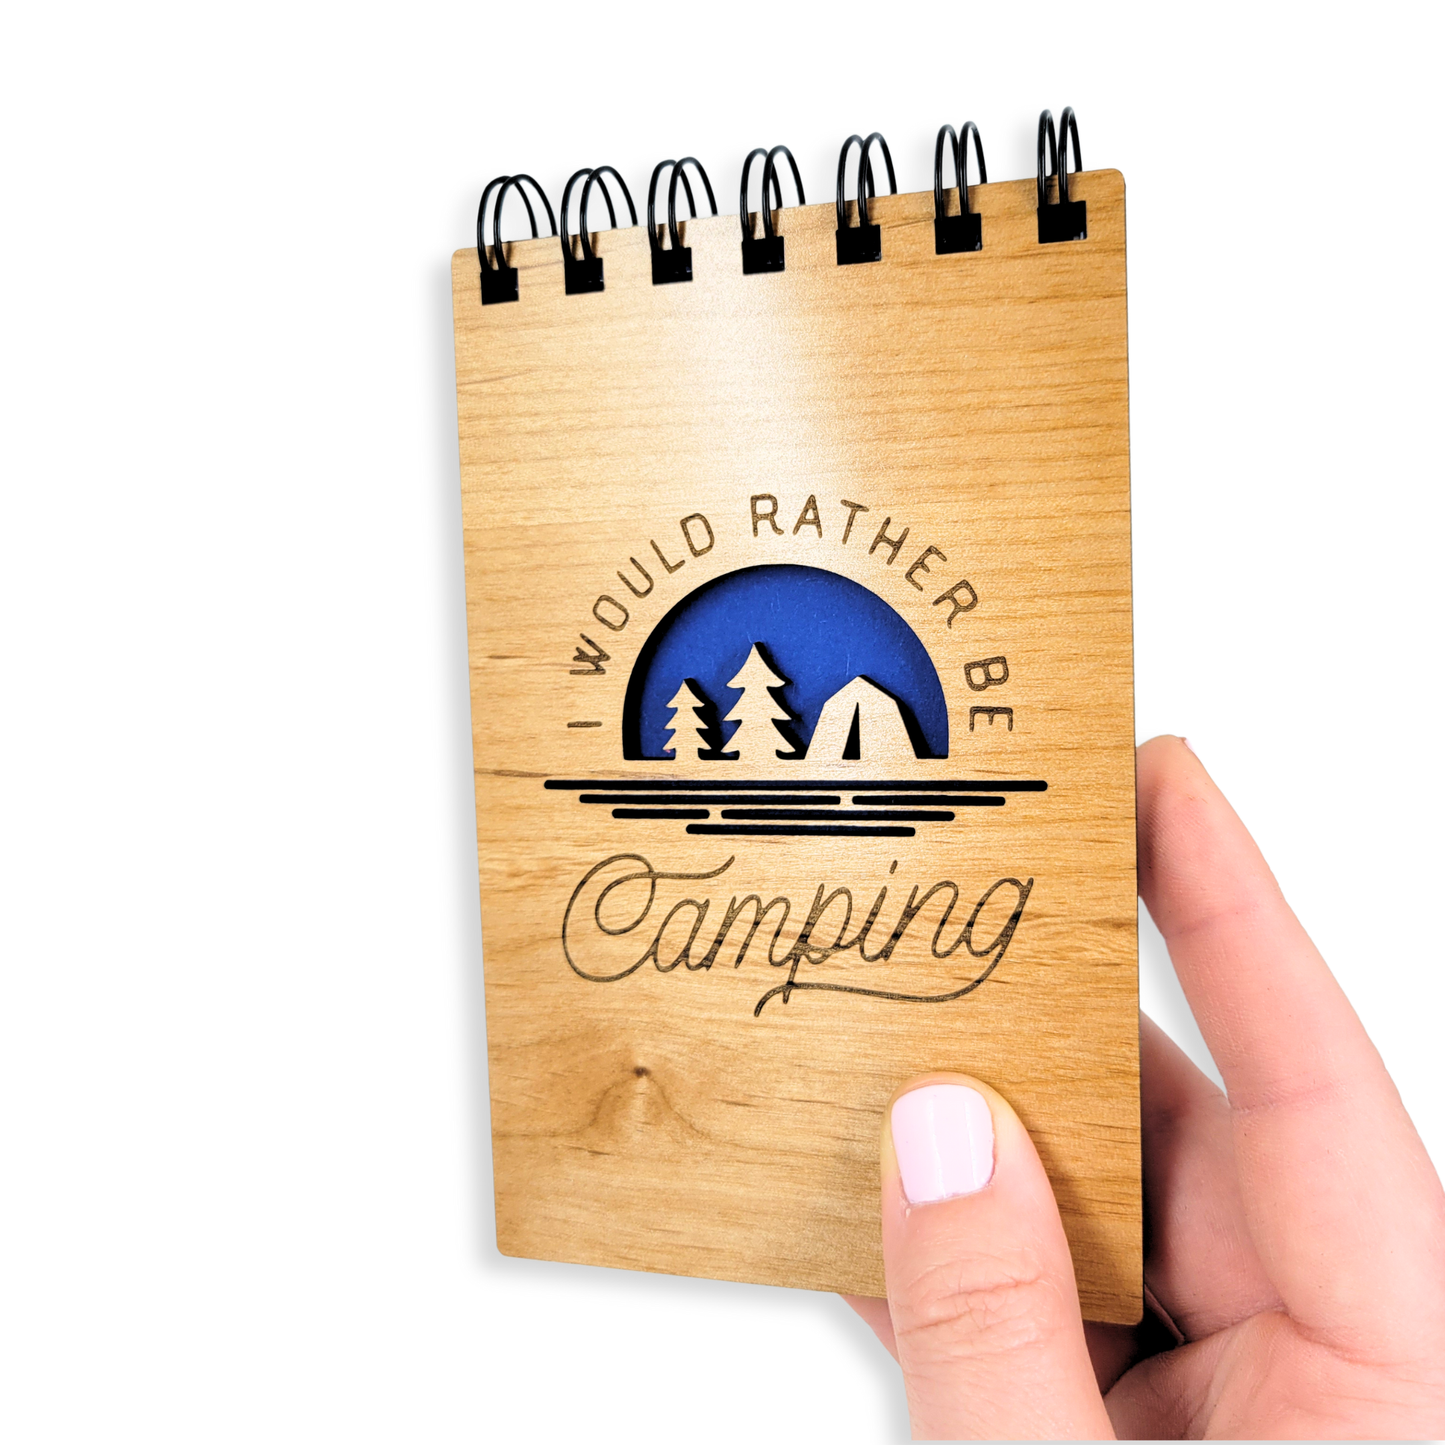 Rather Be Camping Pocket Notebook - Mini Travel Journal